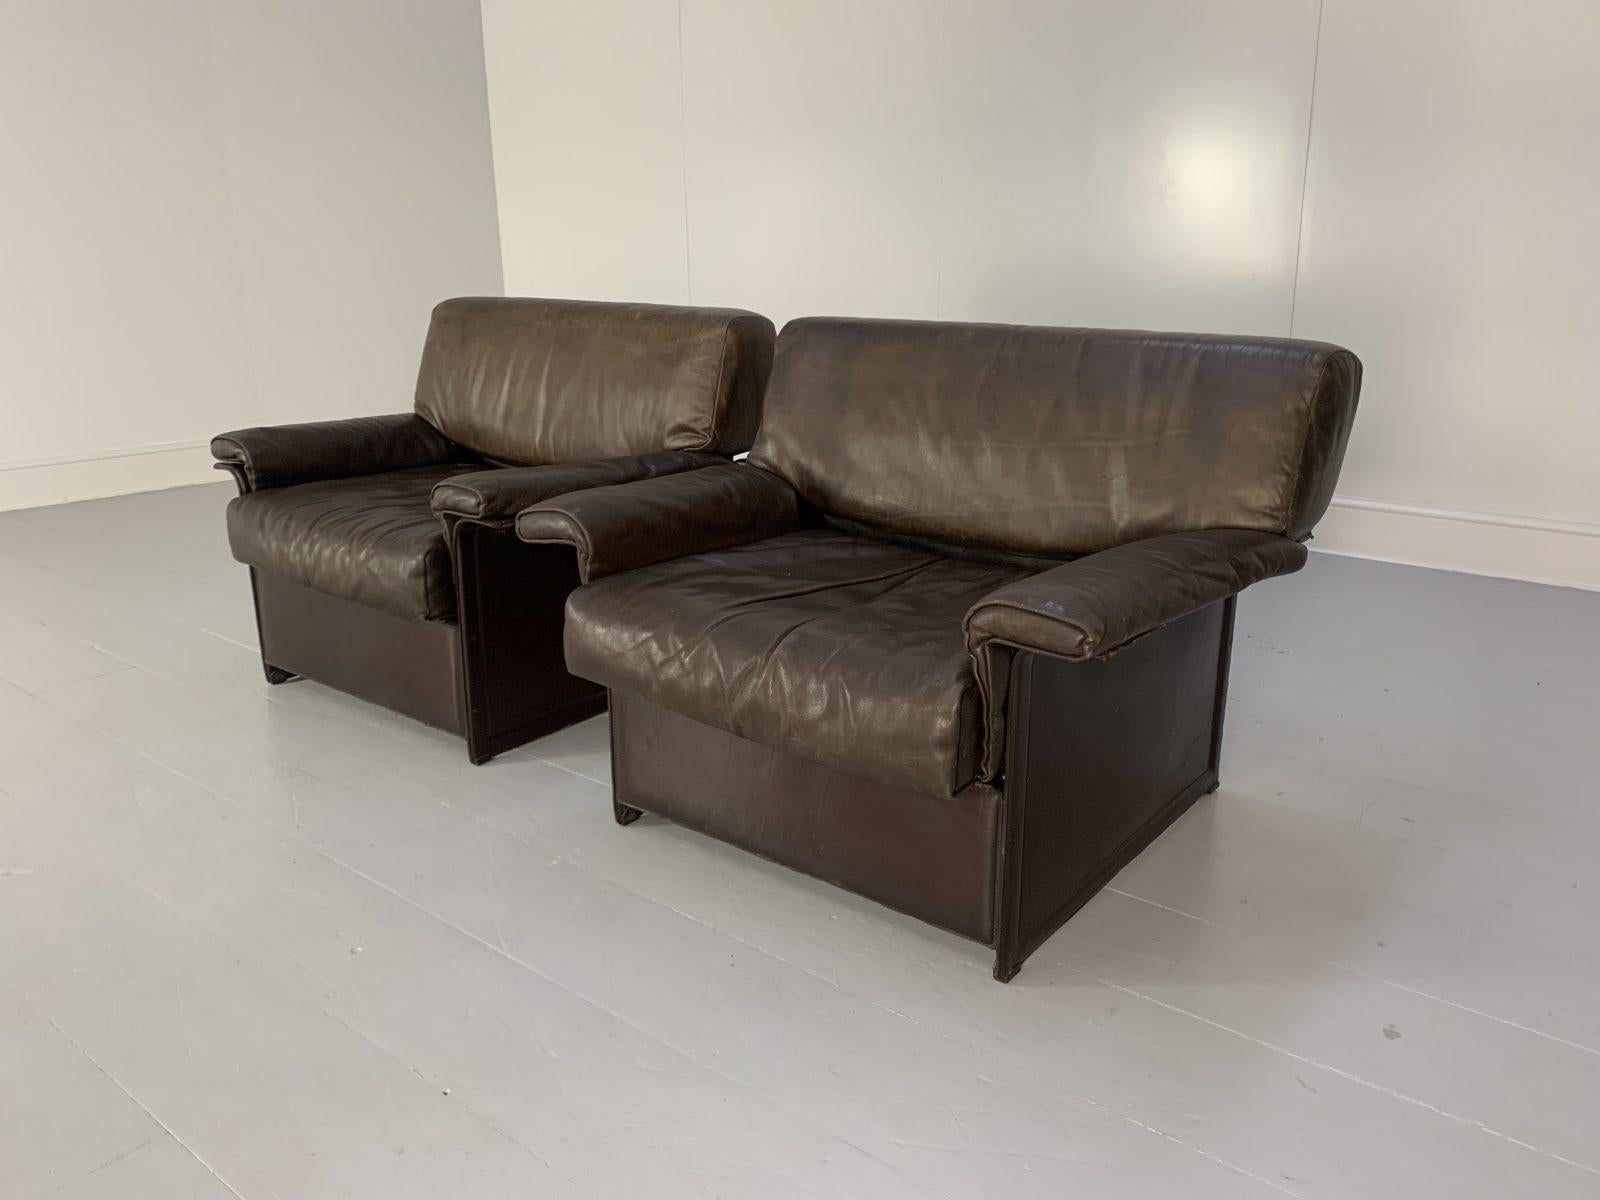 Hello Friends, and welcome to another unmissable offering from Lord Browns Furniture, the UK’s premier resource for fine Sofas and Chairs.

On offer on this occasion is an entirely-original, vintage pair of Matteo Grassi “TM” Armchairs, dressed in